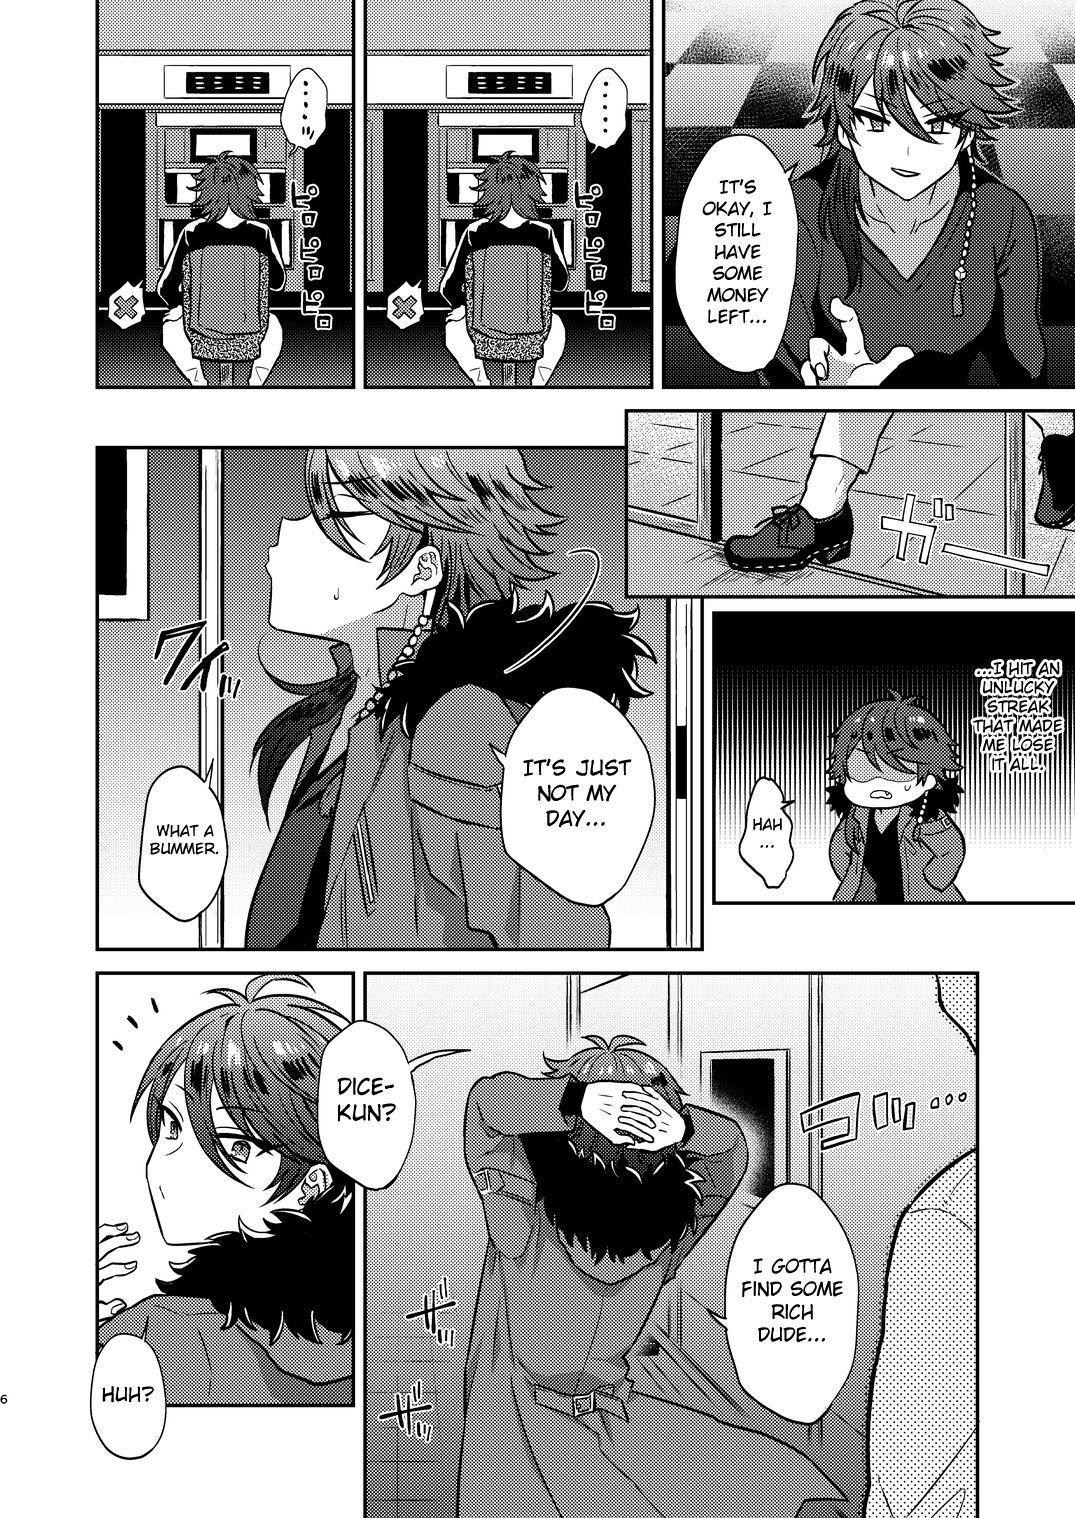 Amatur Porn GAMBLESEX My Life! - Hypnosis mic And - Page 5